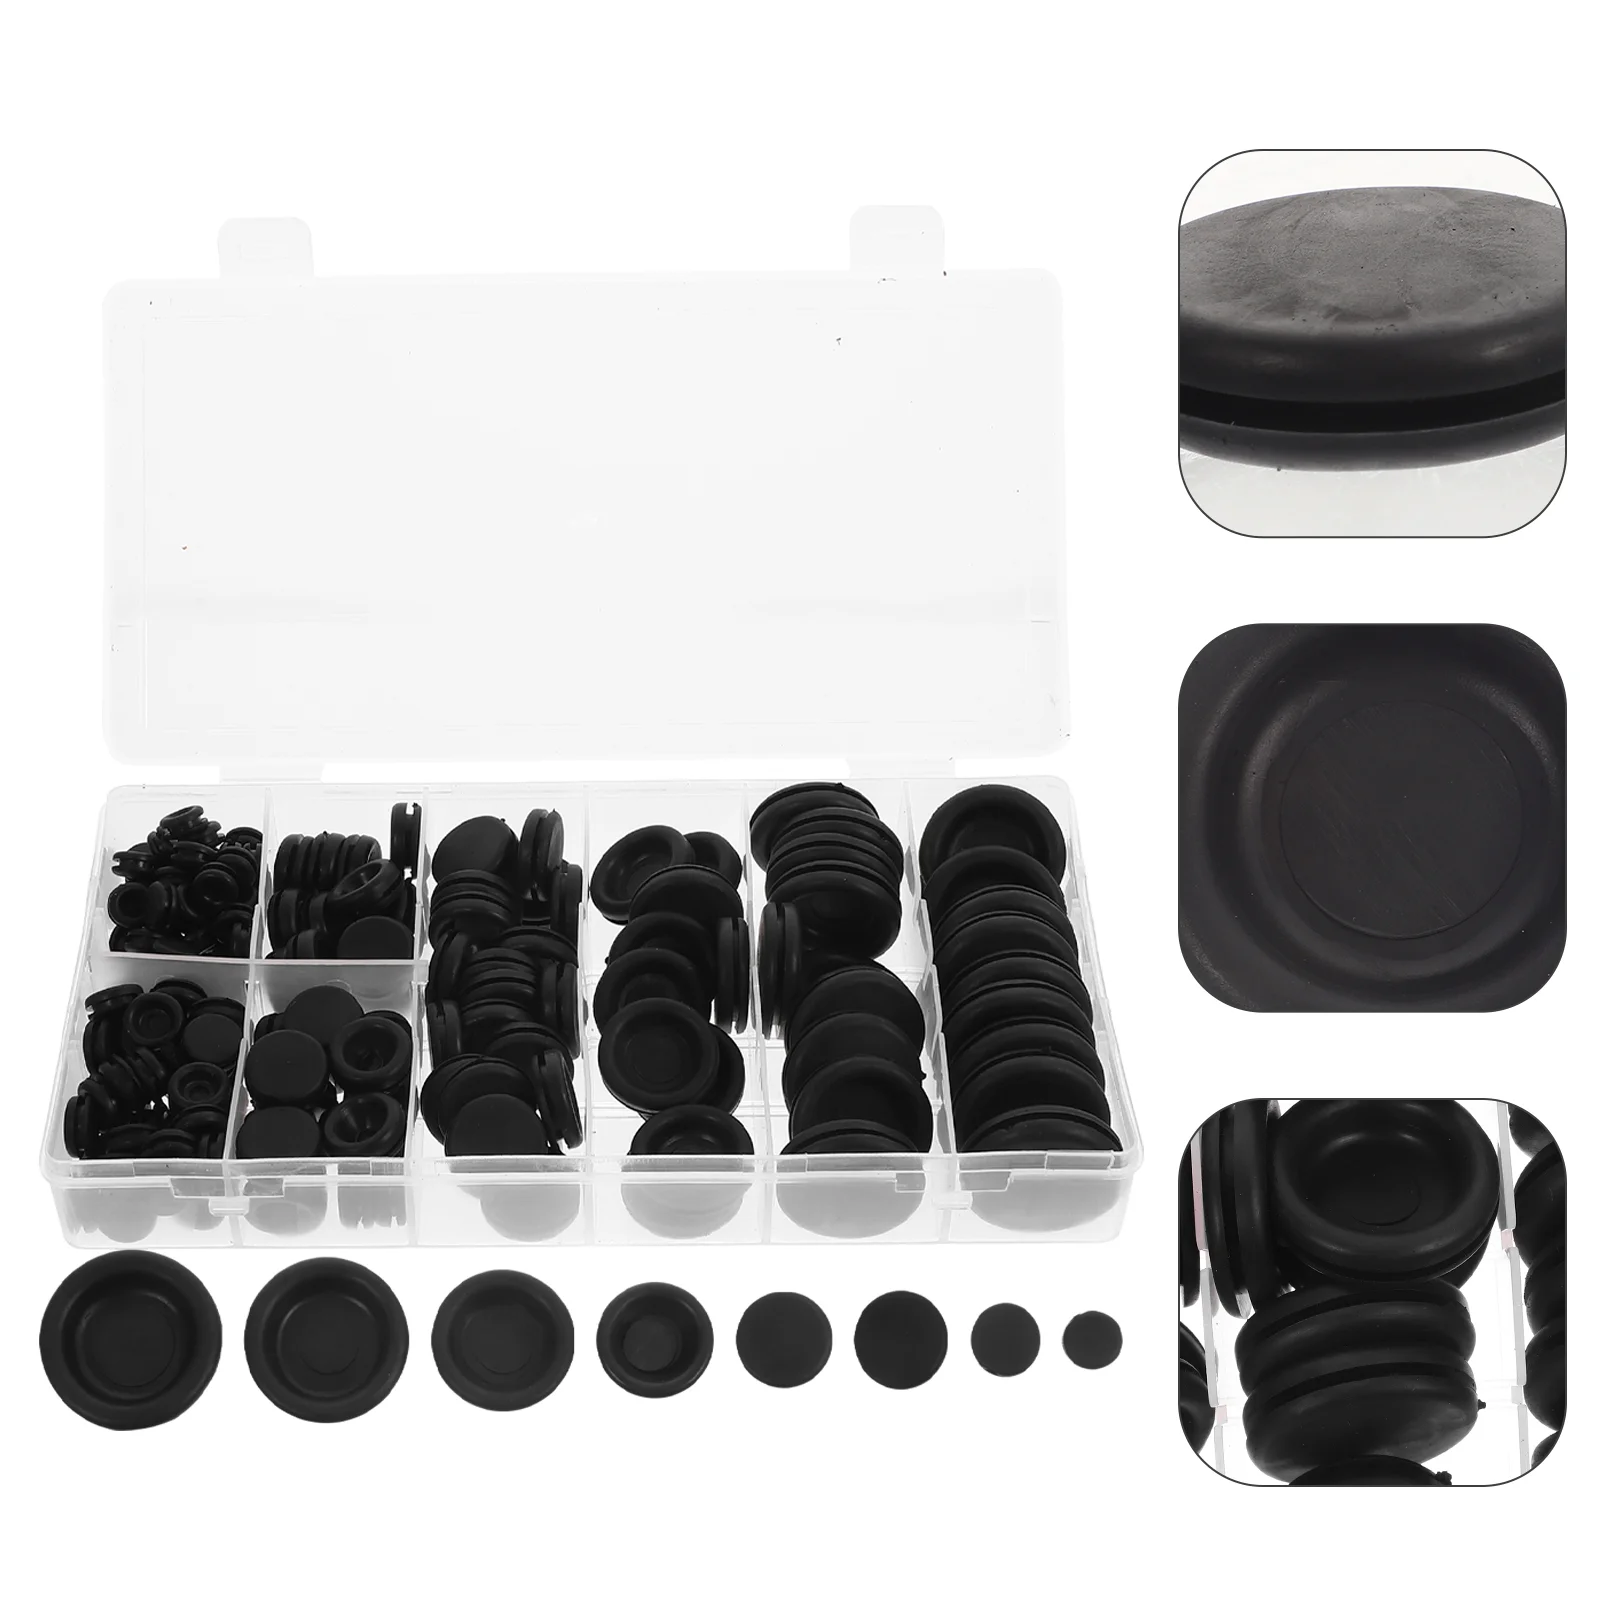 

Rubber Gasket Grommet Grommets Plugs Hole Wire Automotive Wiring Washer Ring Assortment Plug Sealing Kit Electrical Round Sided